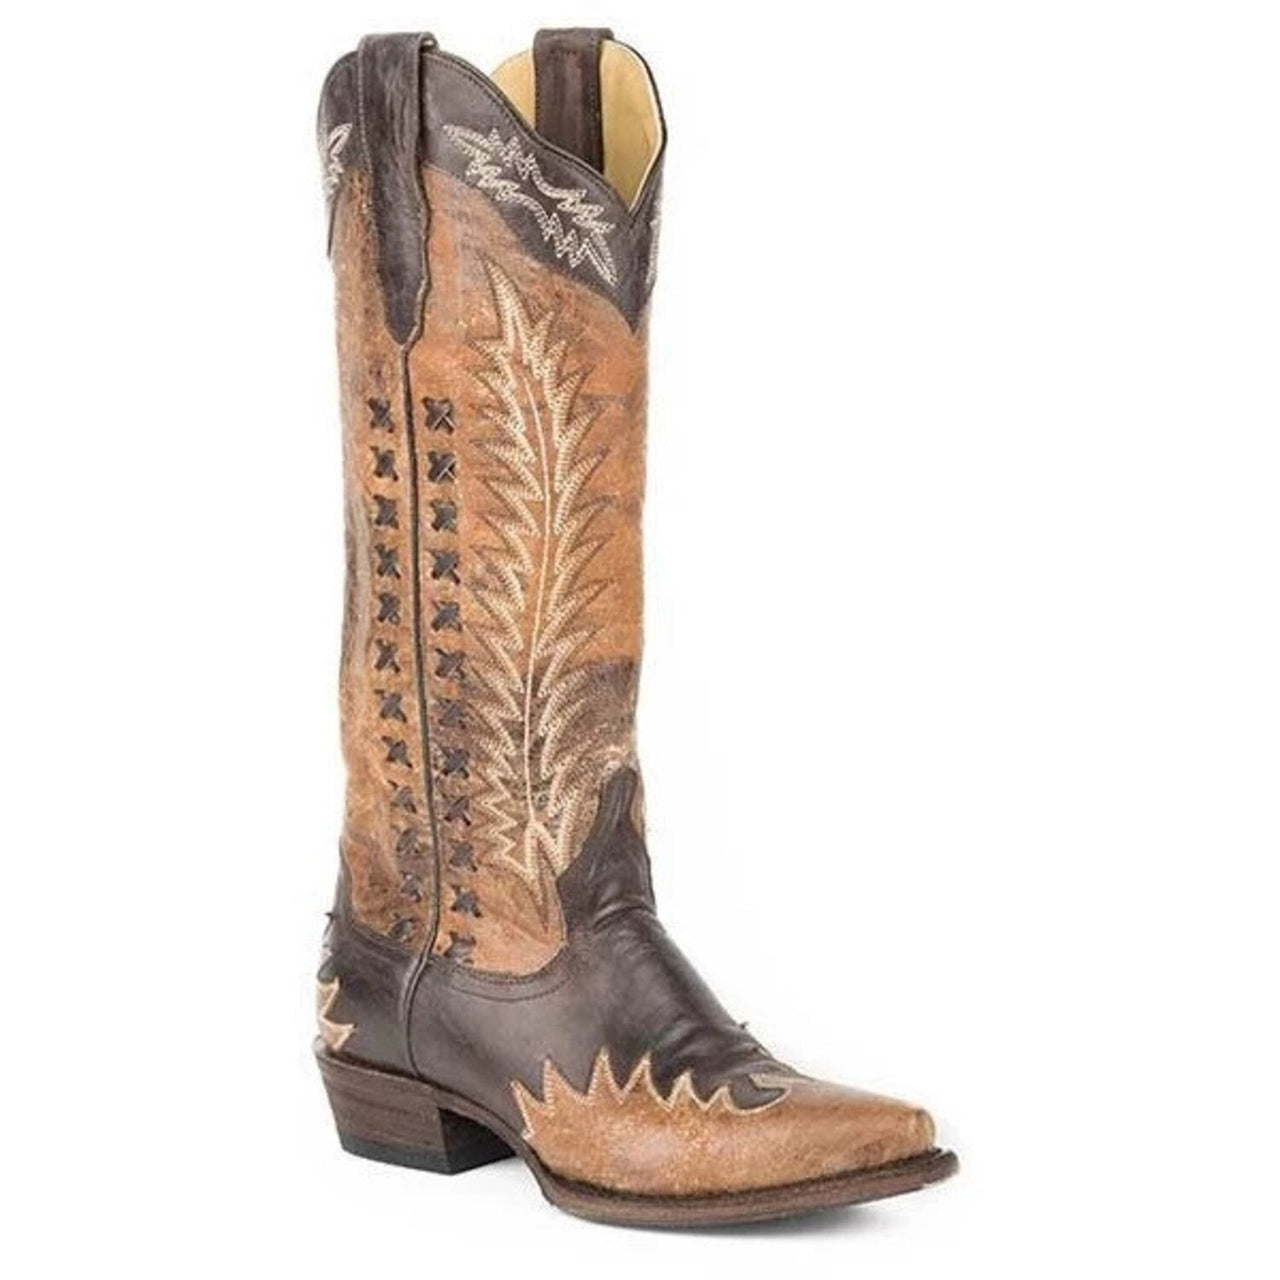 Women's Stetson Morgan Knee High Boots Snip Toe Handcrafted Brown - yeehawcowboy